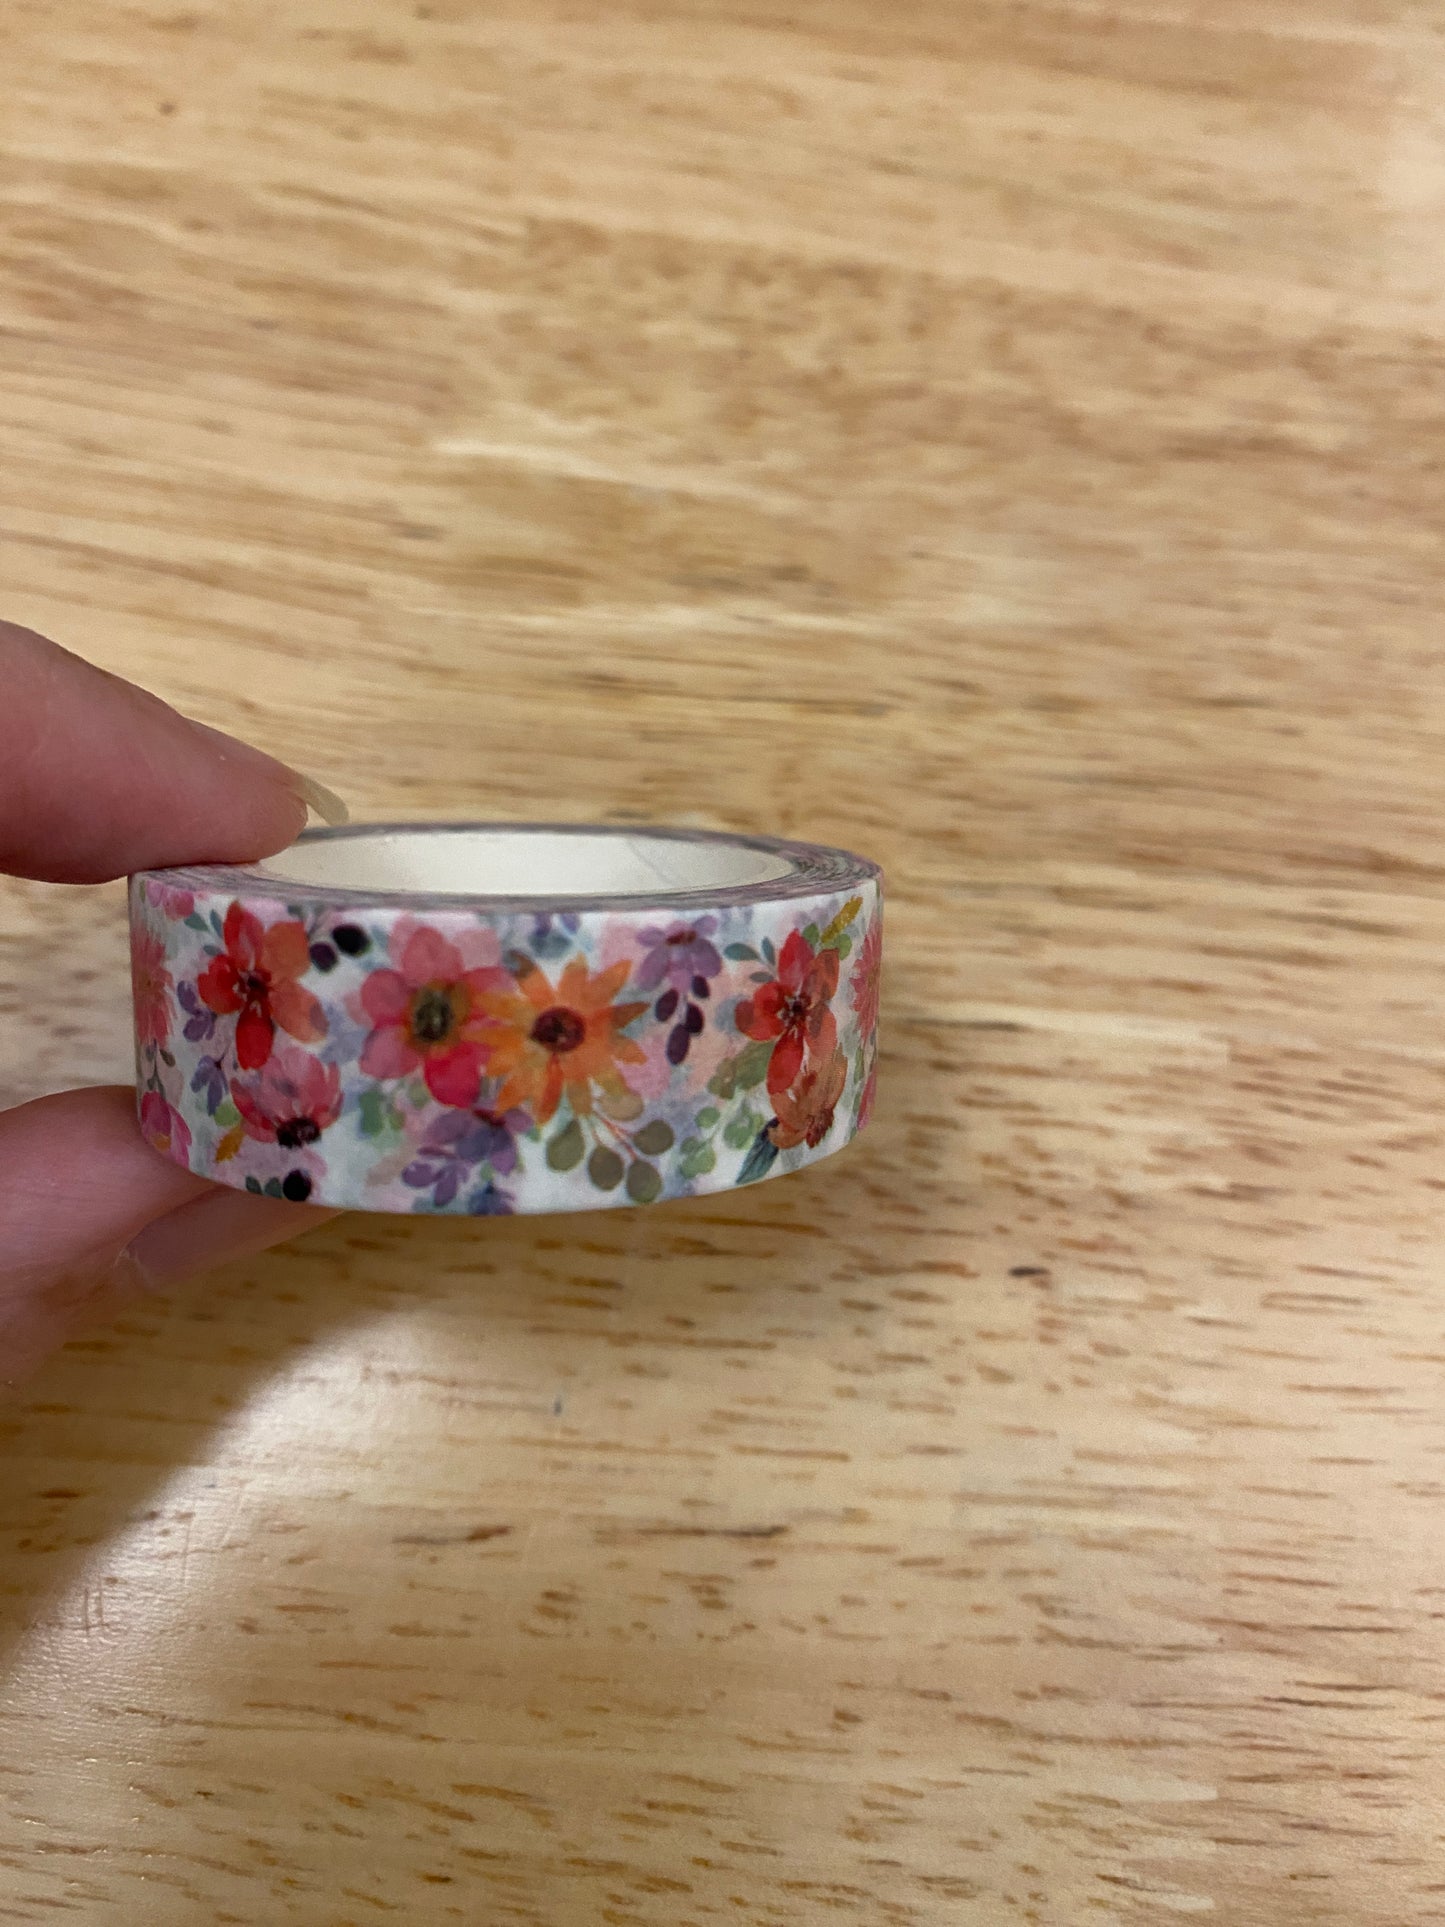 Assorted Red Florals Washi Tape, Red Flowers Washi Tape roll, Washi Tape, Fall Floral Washi tape Big Roll Flower Red Washi Tape